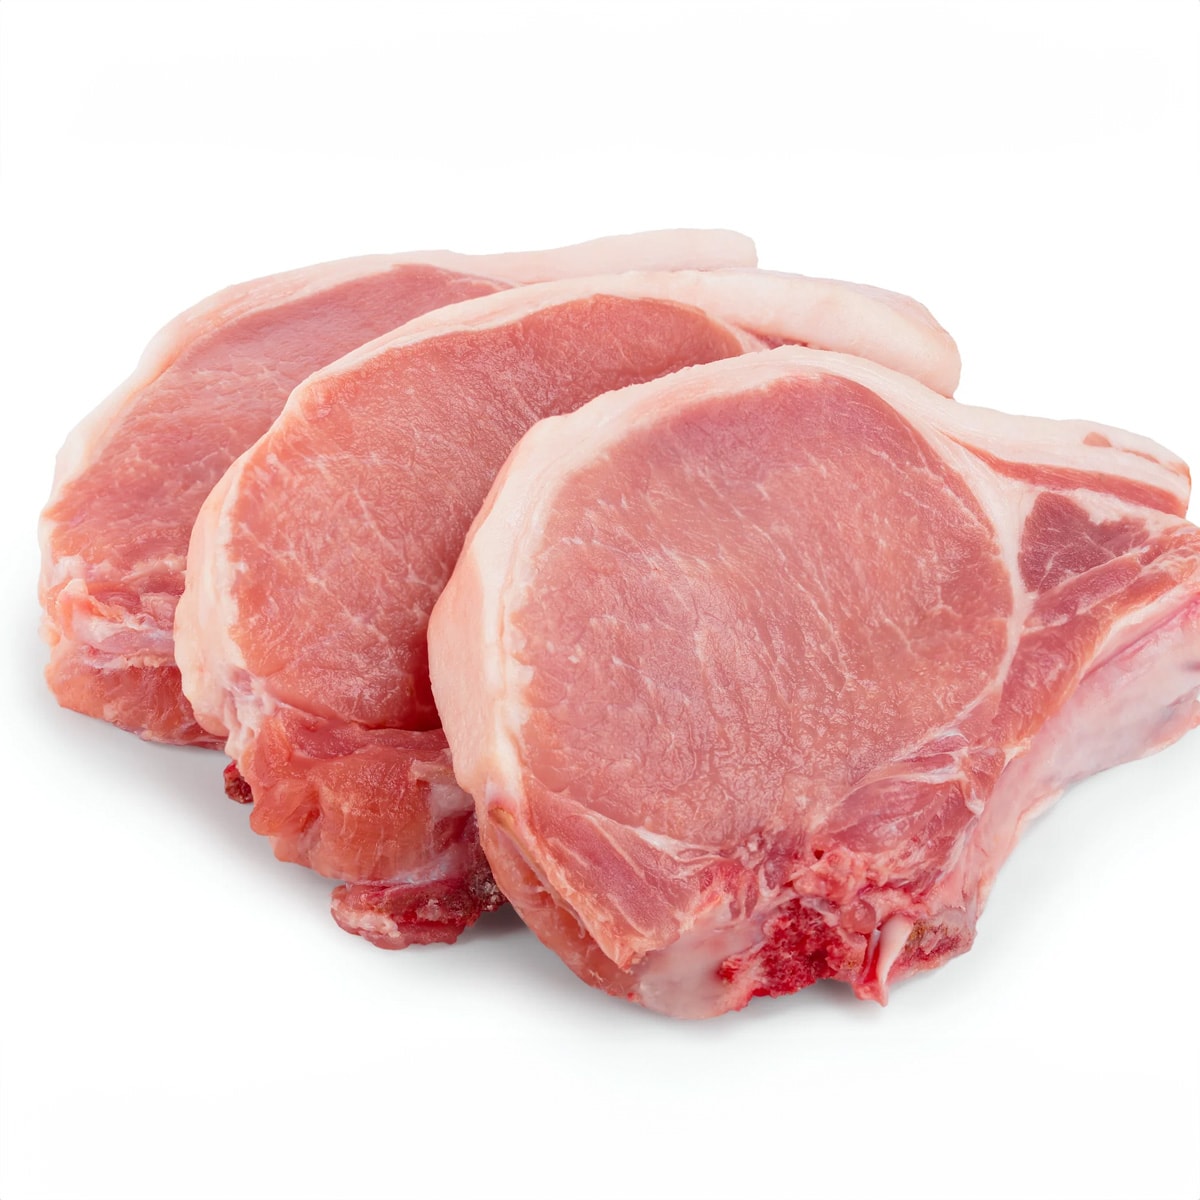 Close look of 3 pieces of pork chops isolated on white background.